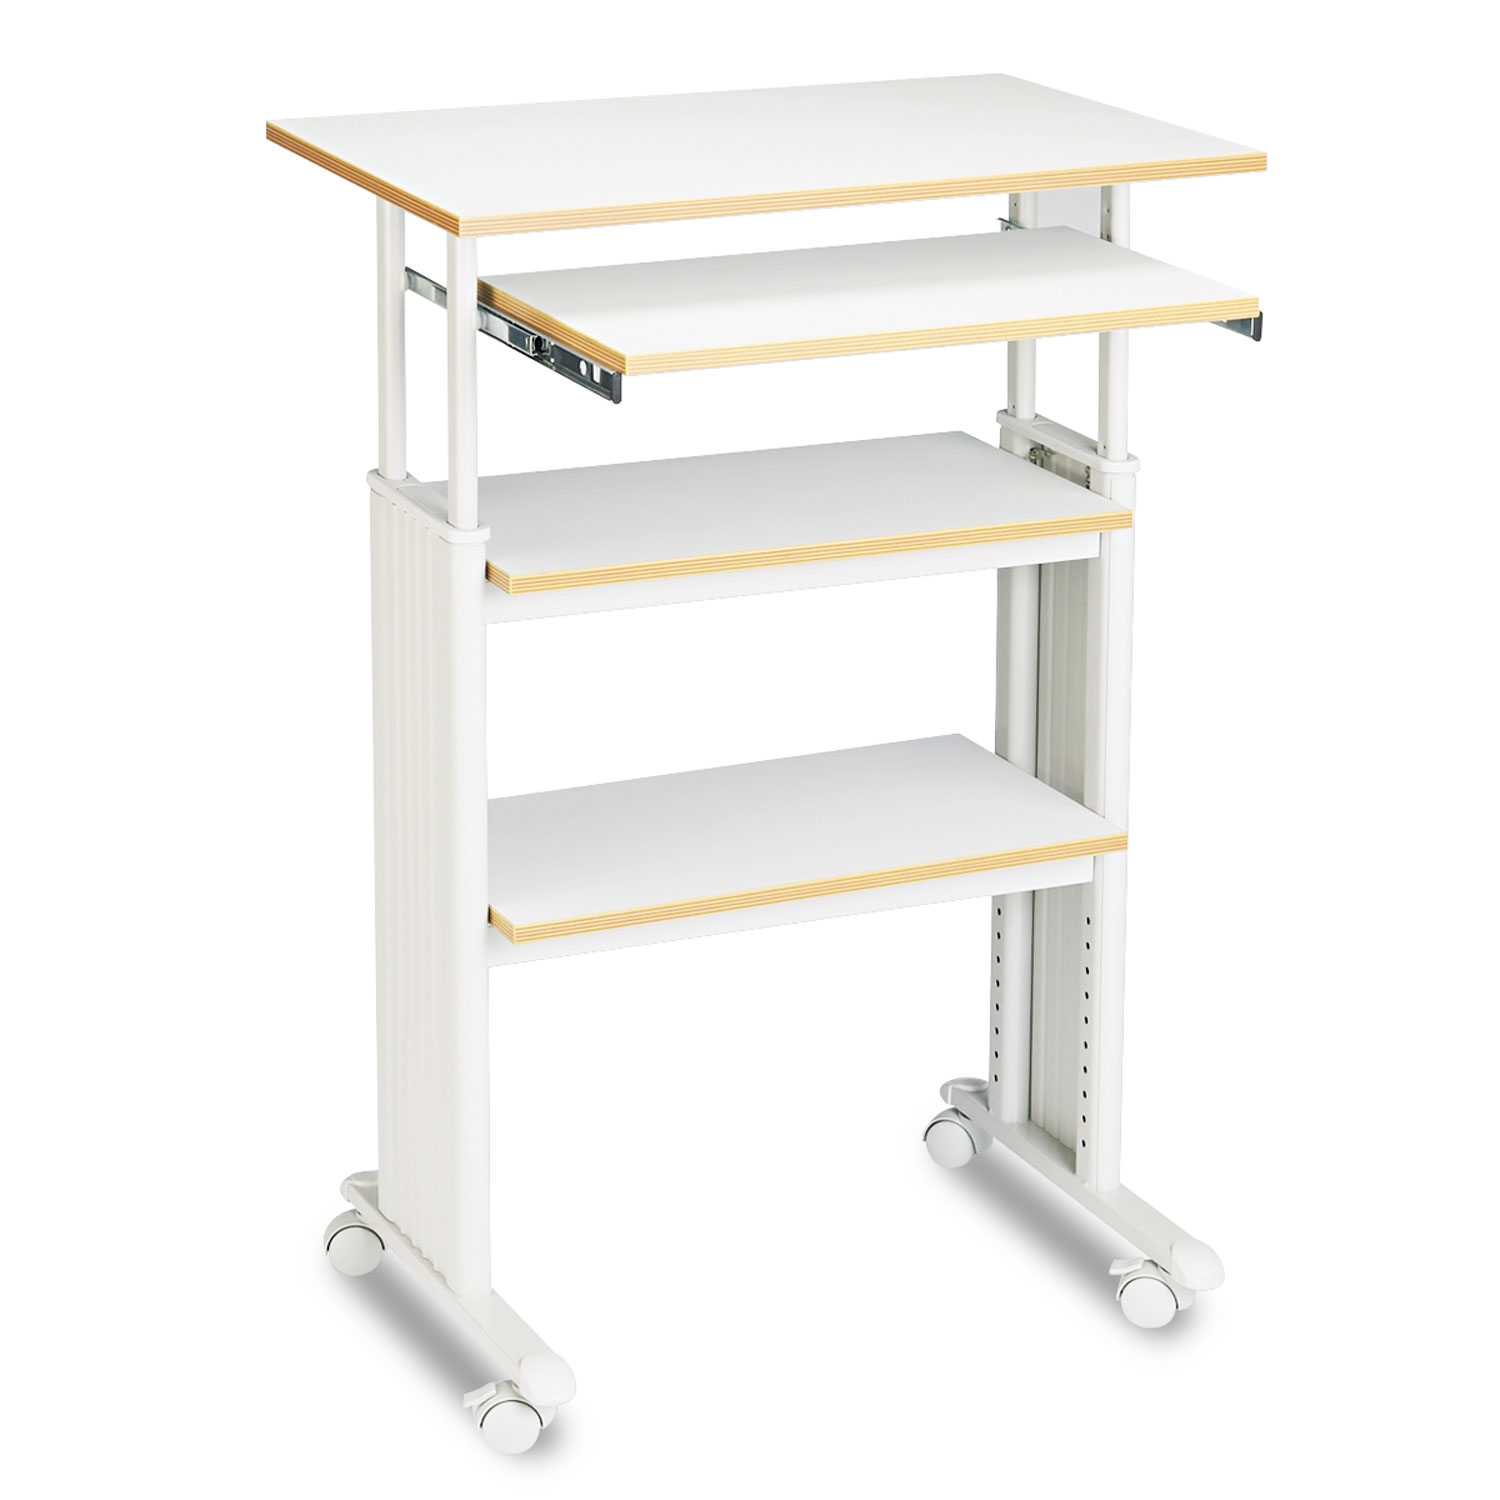 Safco Muv Stand-up Adjustable Height Desk - Rectangle Top - Assembly Required - Gray - Steel, Polyvinyl Chloride (PVC)